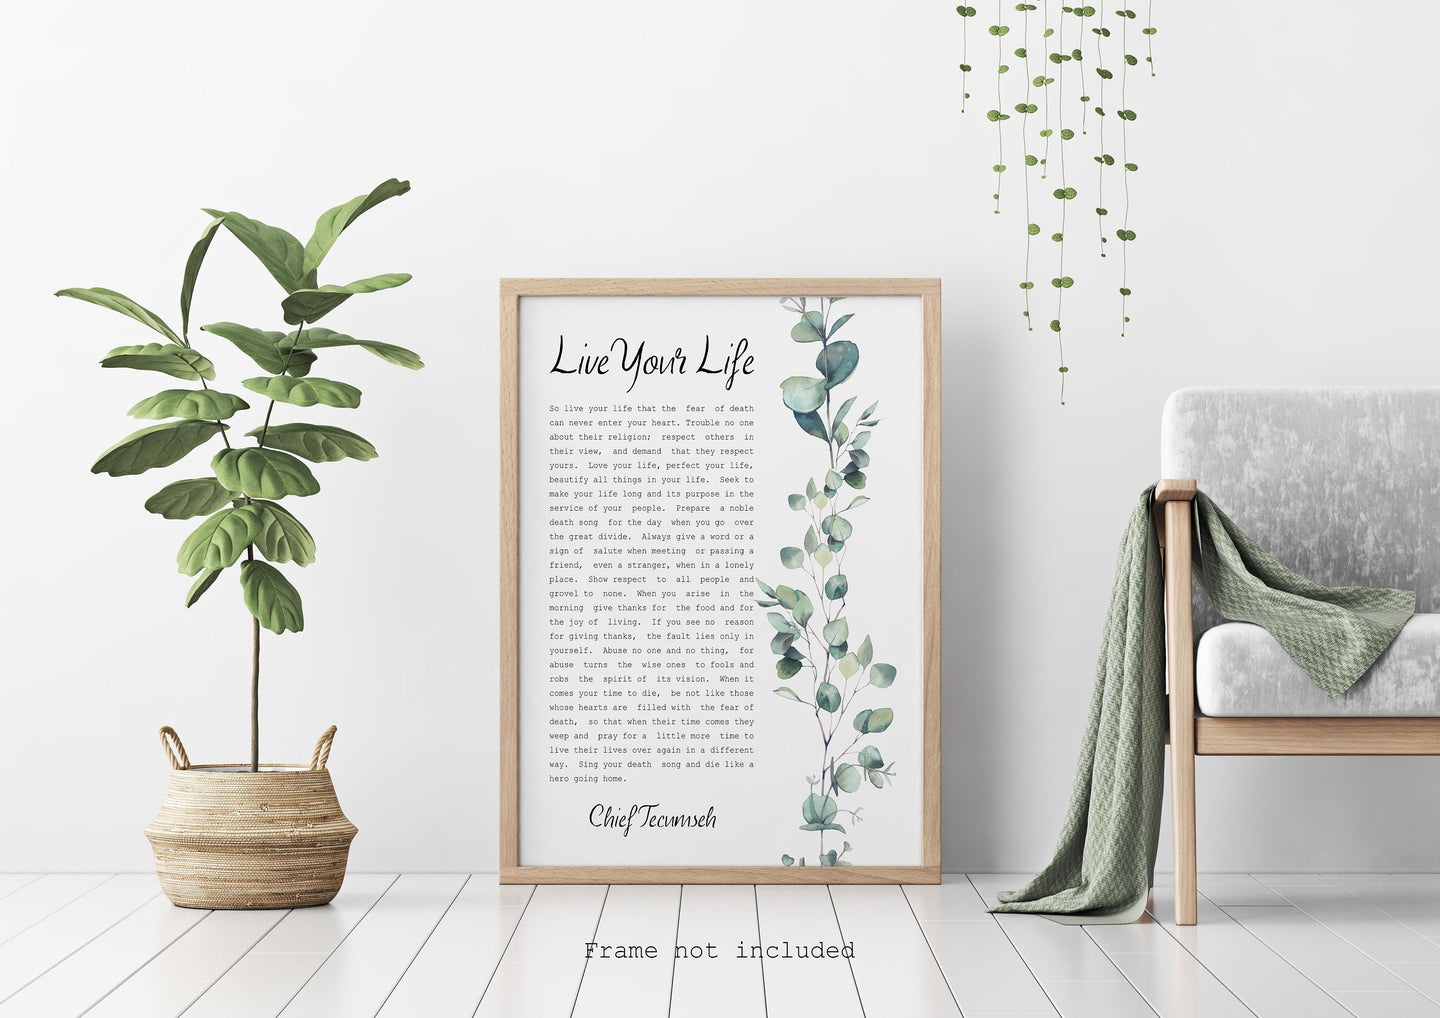 Live Your Life by Chief Tecumseh Native American Poetry Poster Print, Physical Print Without Frame